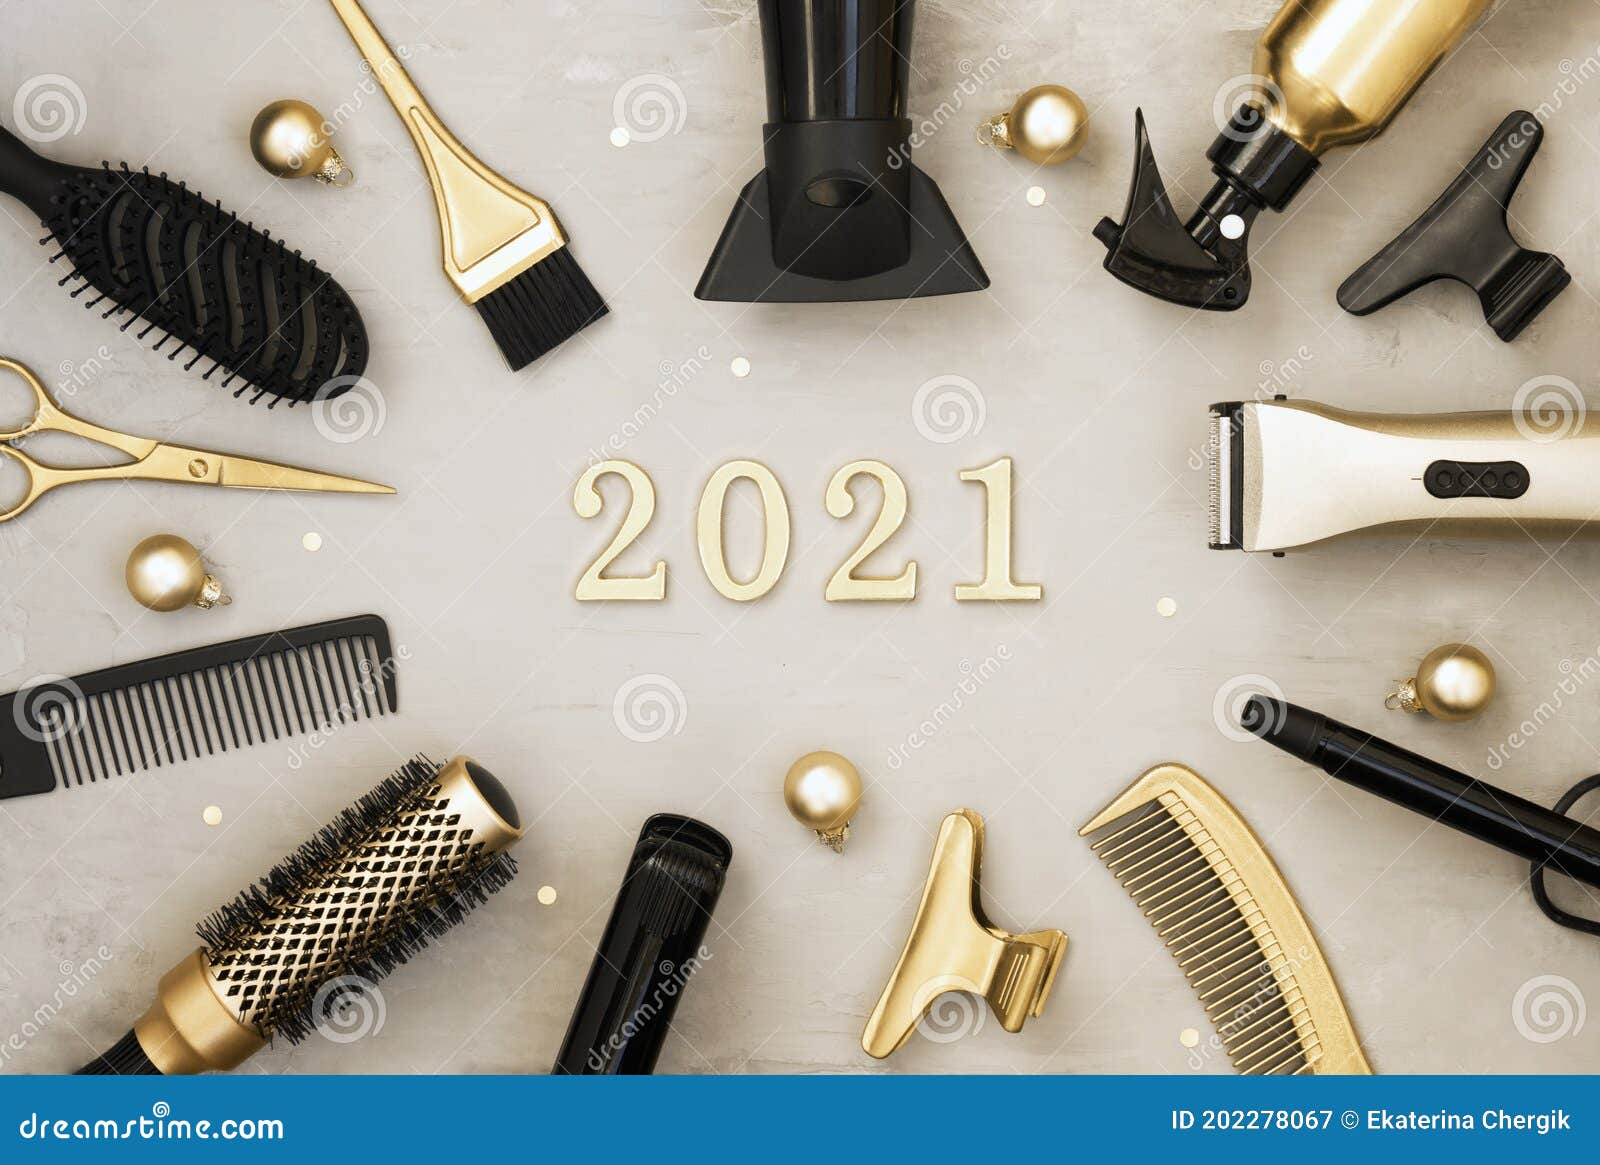 New Year Banner with Hairdressing Tools and Figures 2021. Gold and Black  Hair Salon Items. Stock Image - Image of flat, background: 202278067